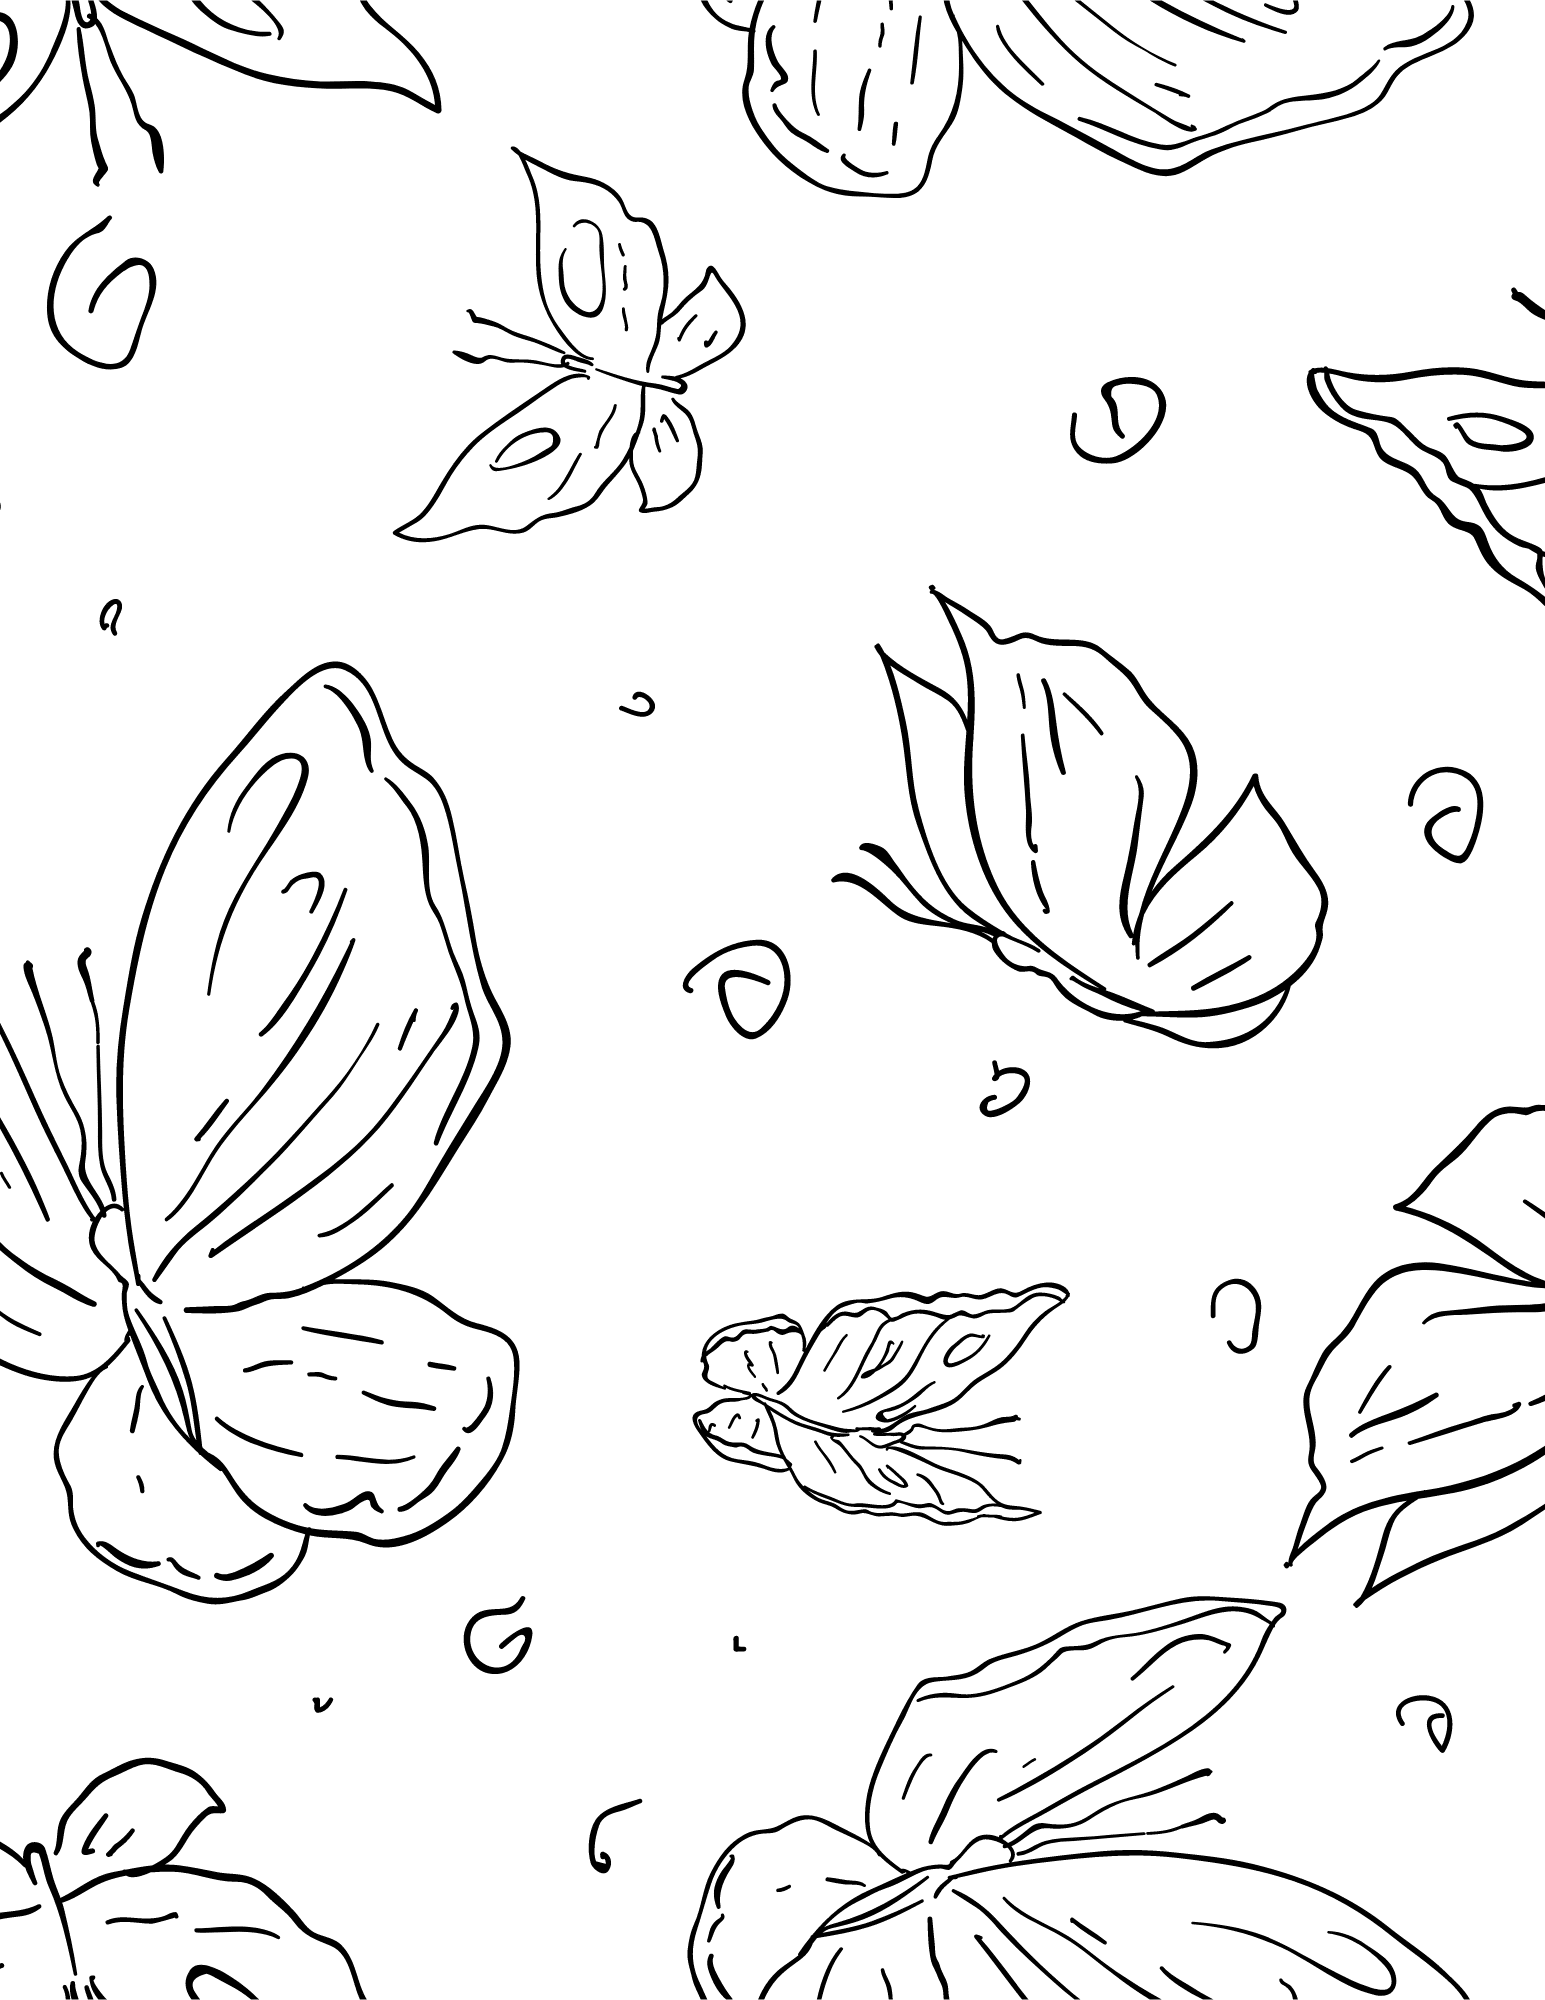 Pretty butterfly coloring sheets with different wing patterns